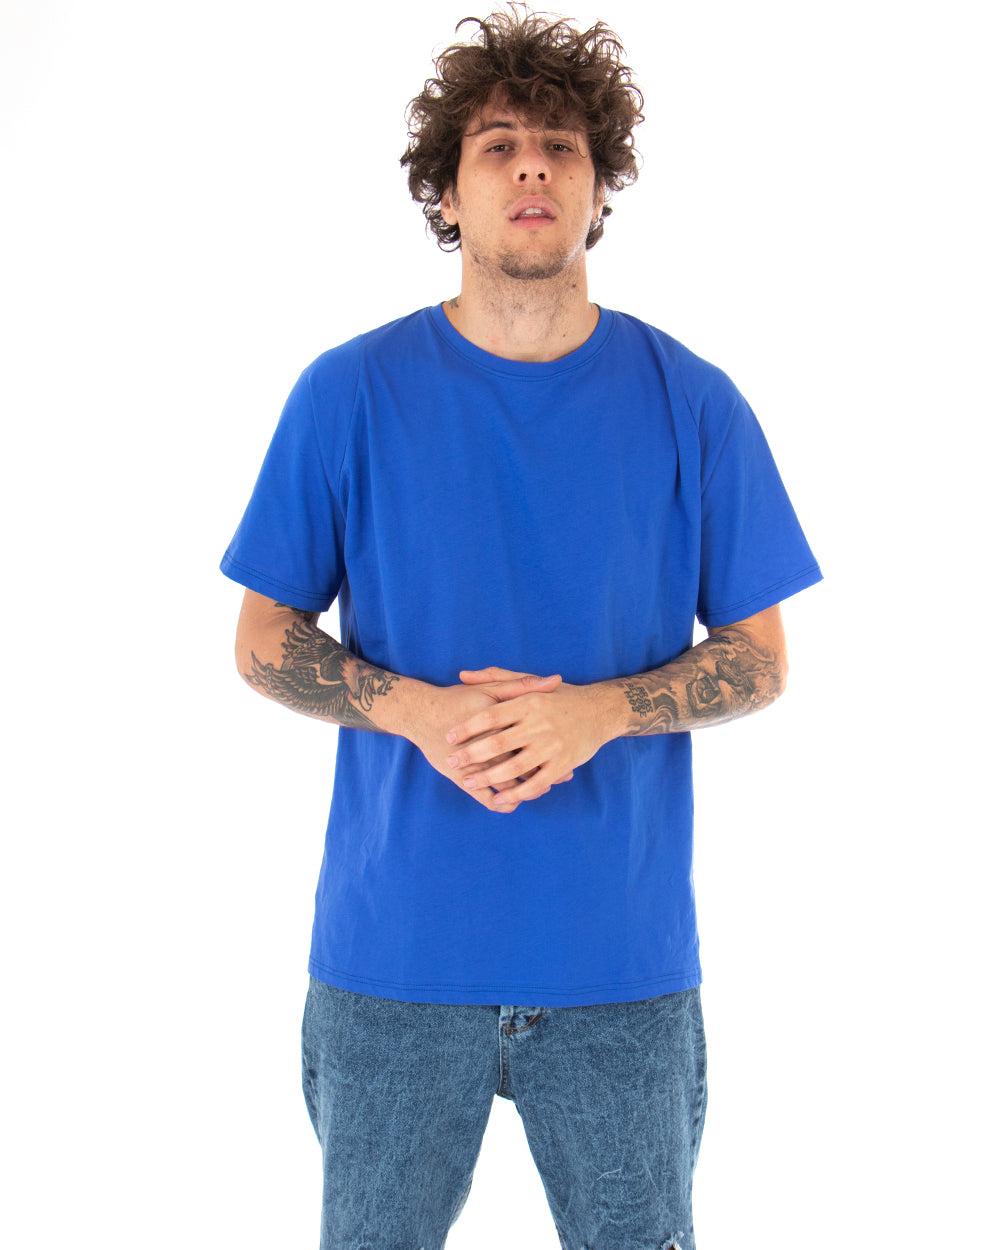 Men's T-shirt Oversize Round Neck Solid Color Casual Royal Blue Basic Short Sleeve GIOSAL-TS2925A